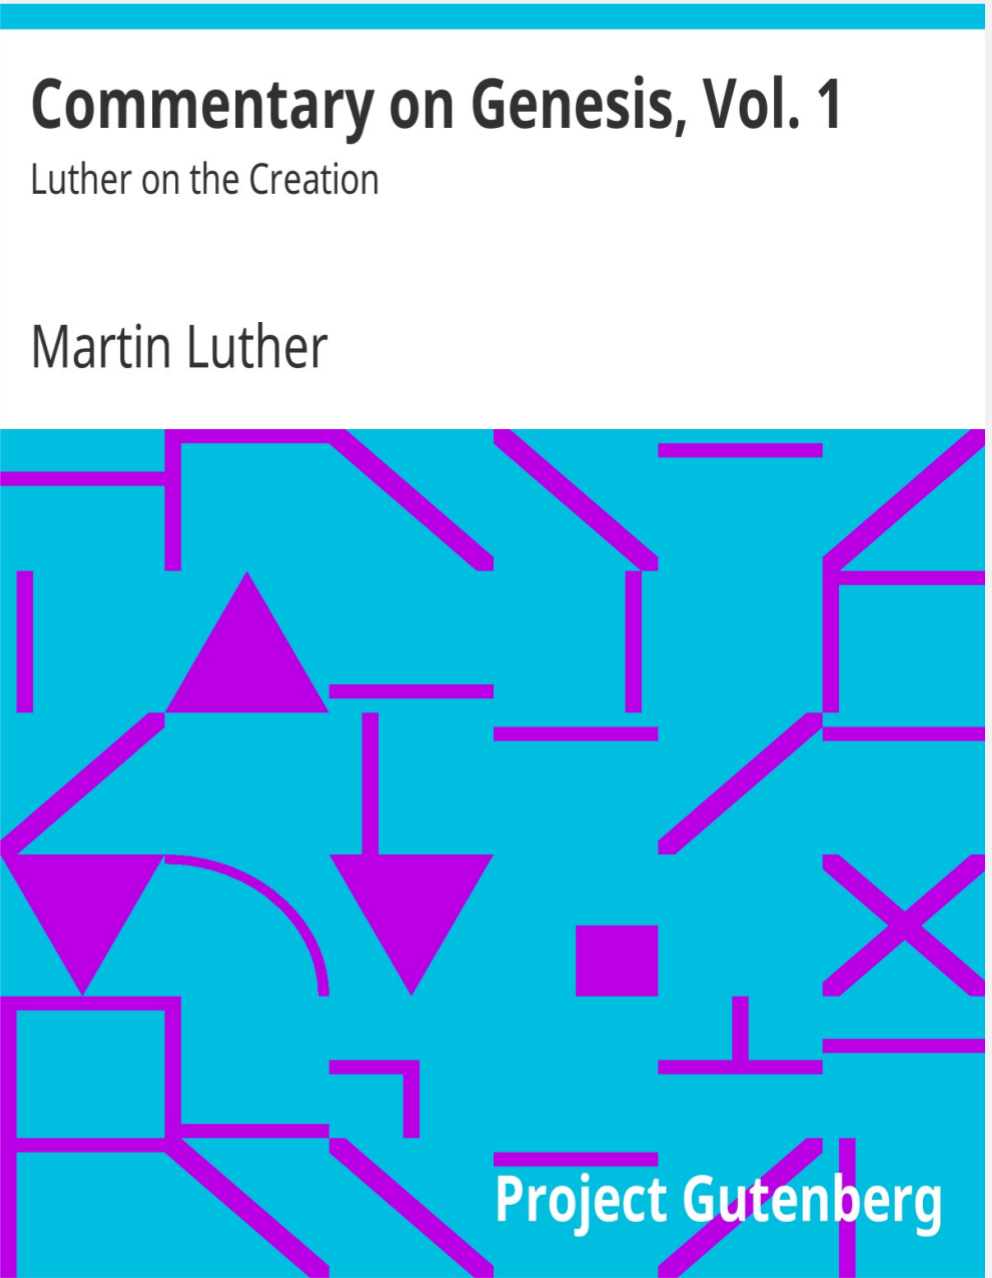 COMMENTARY ON THE BOOK OF GENESIS BY MARTIN LUTHER PDF